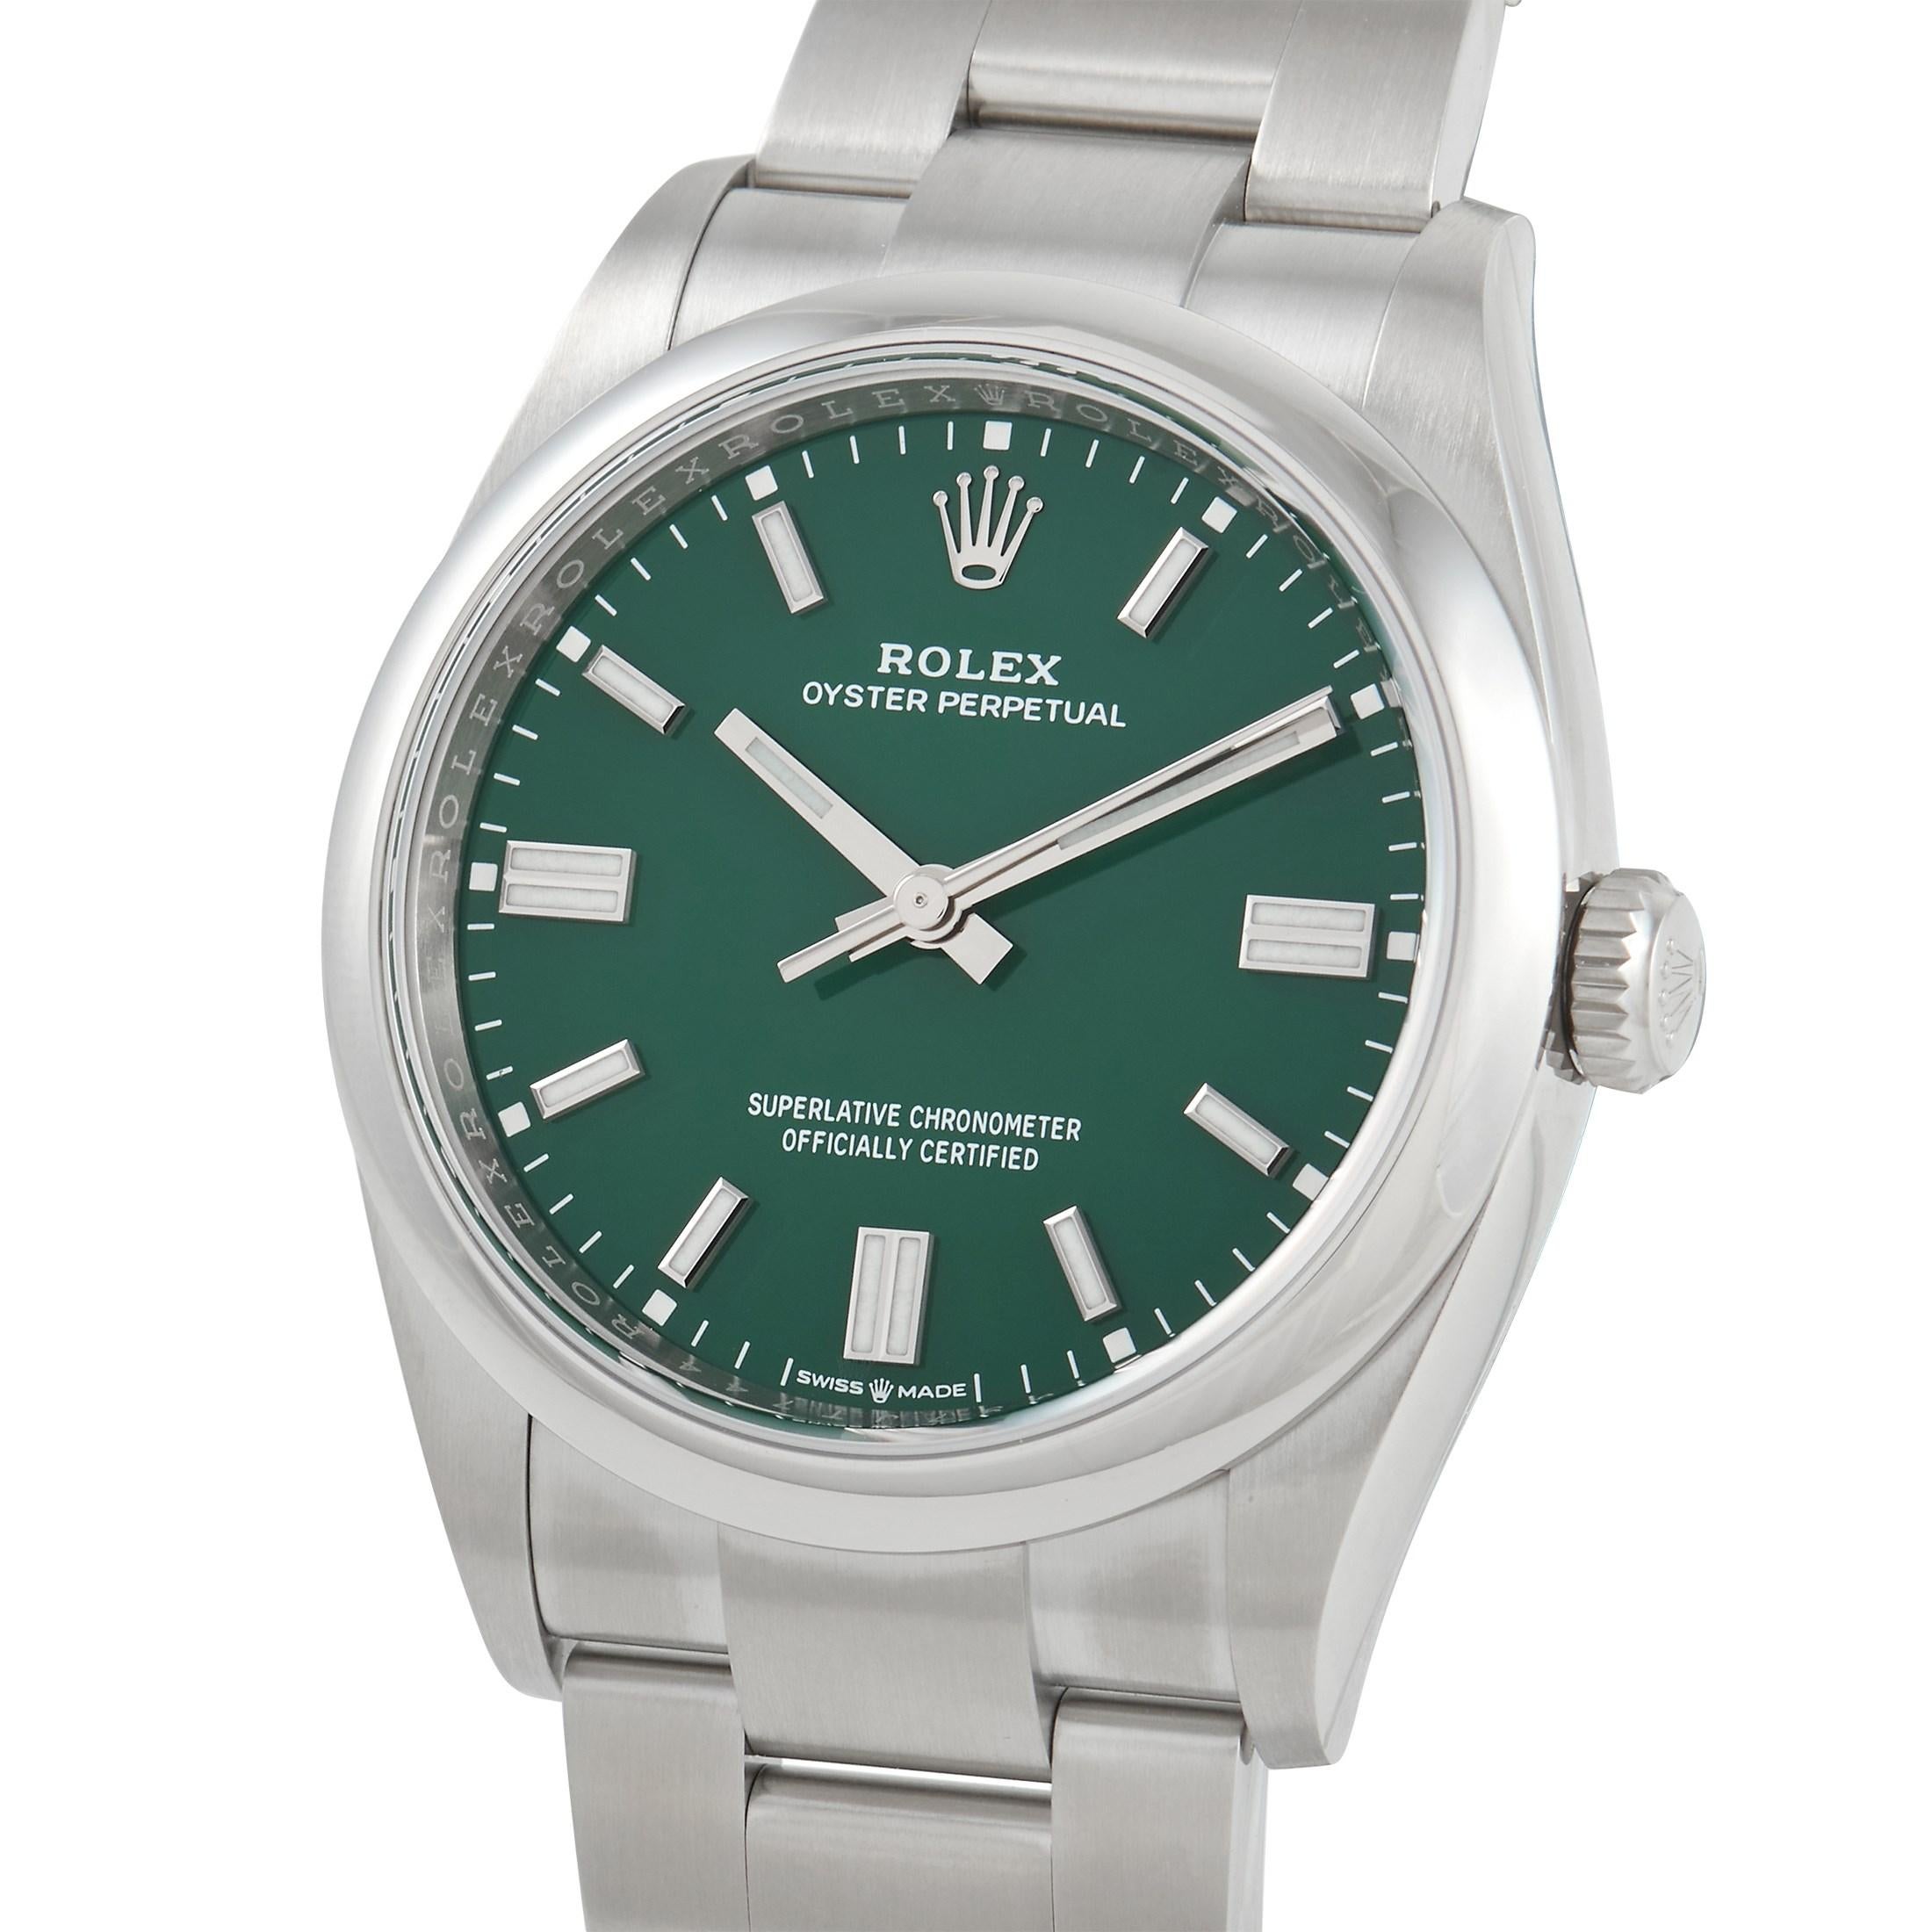 An ideal dress watch versatile enough for any occasion, this Rolex Oyster Perpetual 36 Green Dial Automatic Watch 126000GNSO has a sophisticated appeal that will complement any outfit. It features a 36mm Oystersteel case with a domed bezel and a